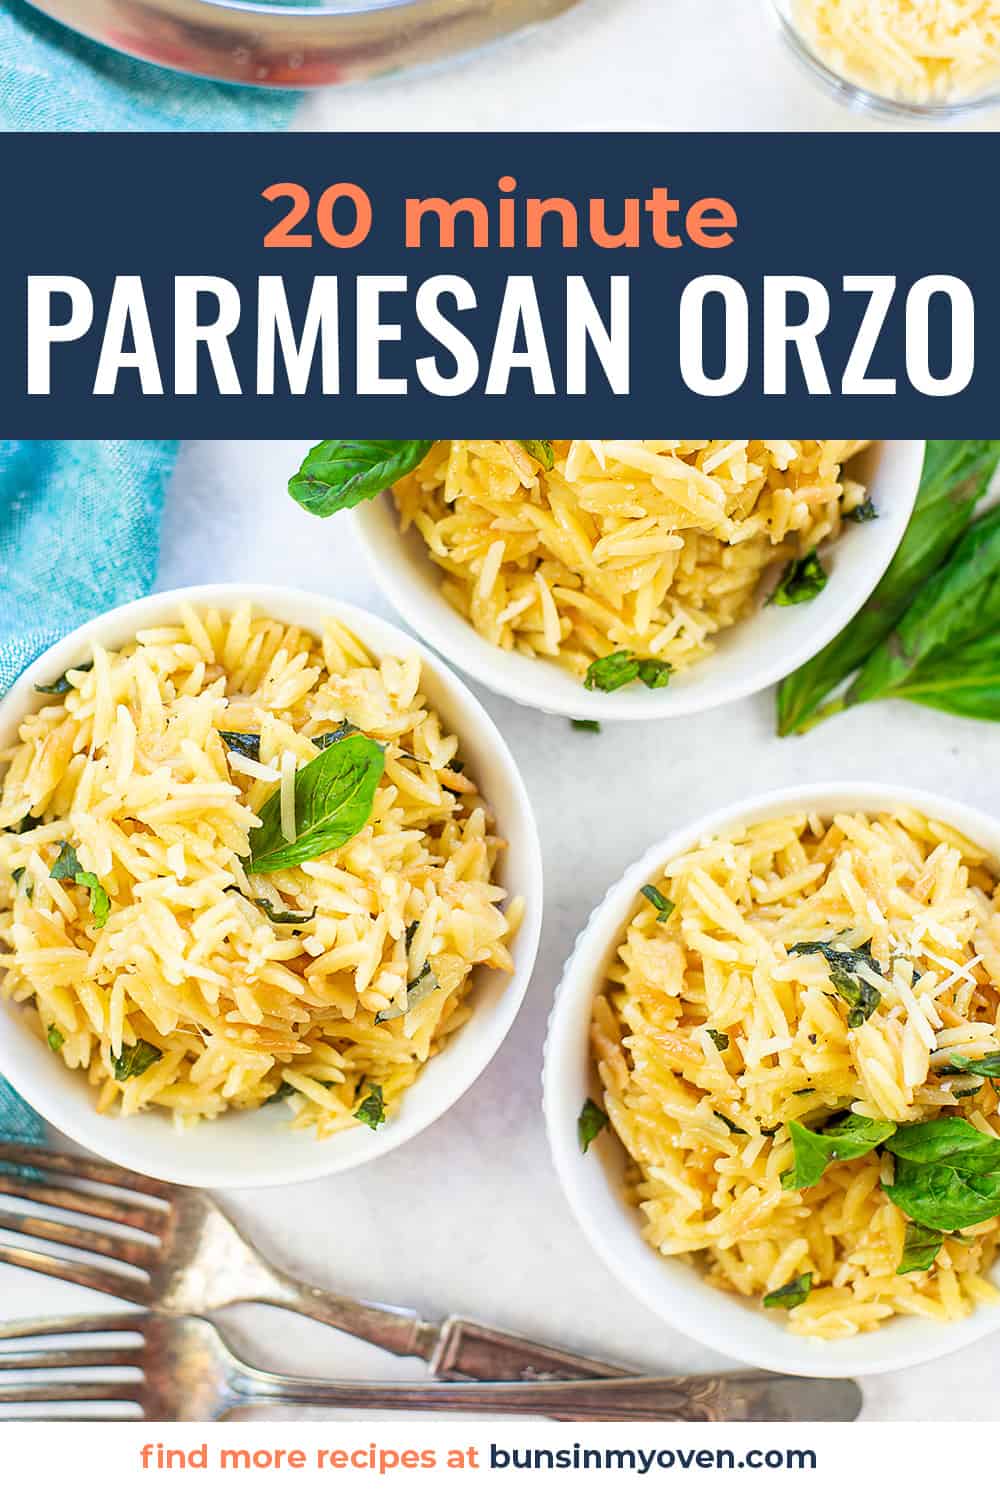 parmesan orzo in white bowls with text for Pinterest.